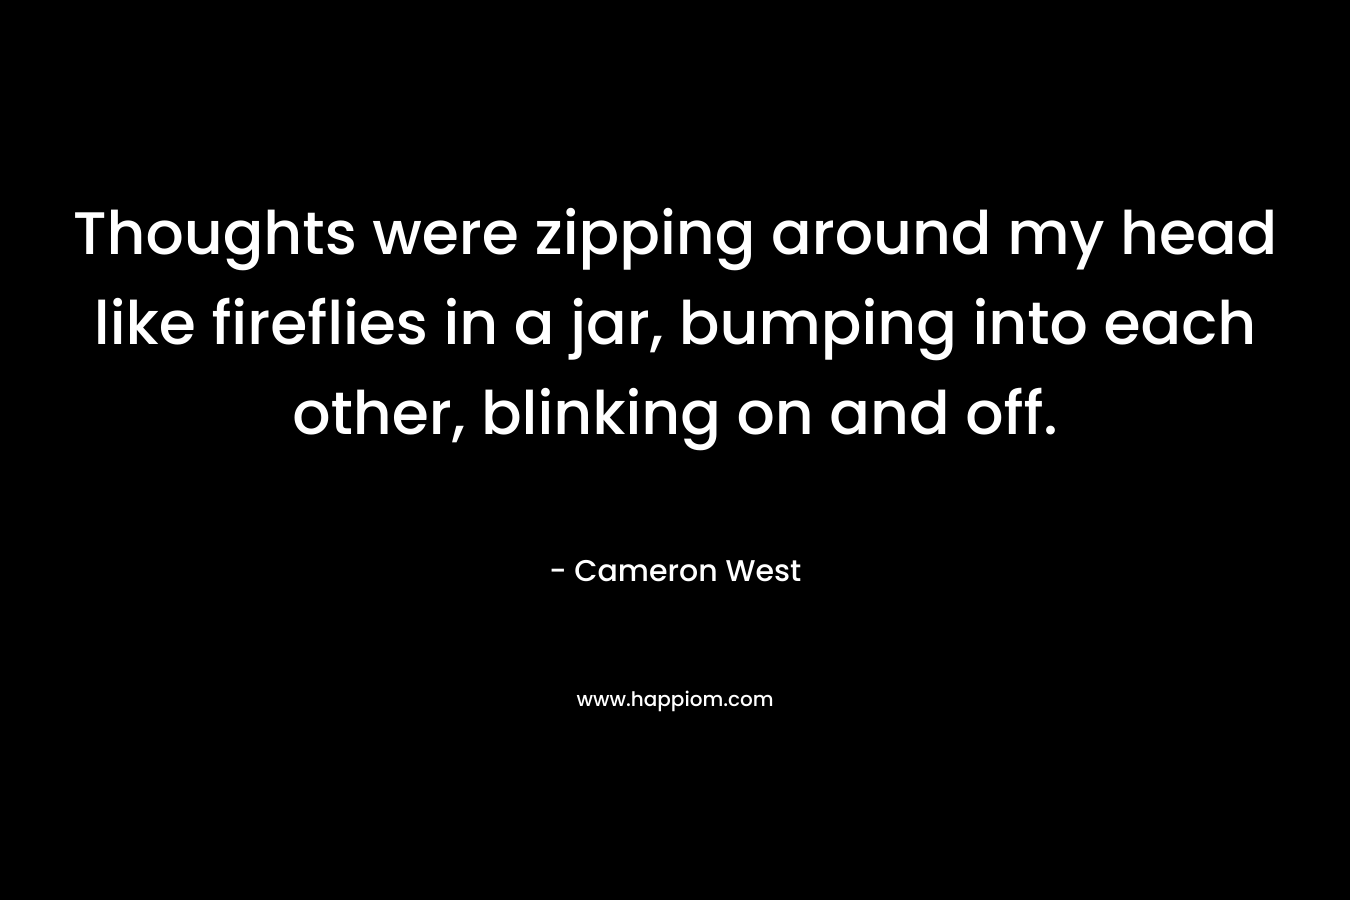 Thoughts were zipping around my head like fireflies in a jar, bumping into each other, blinking on and off. – Cameron West